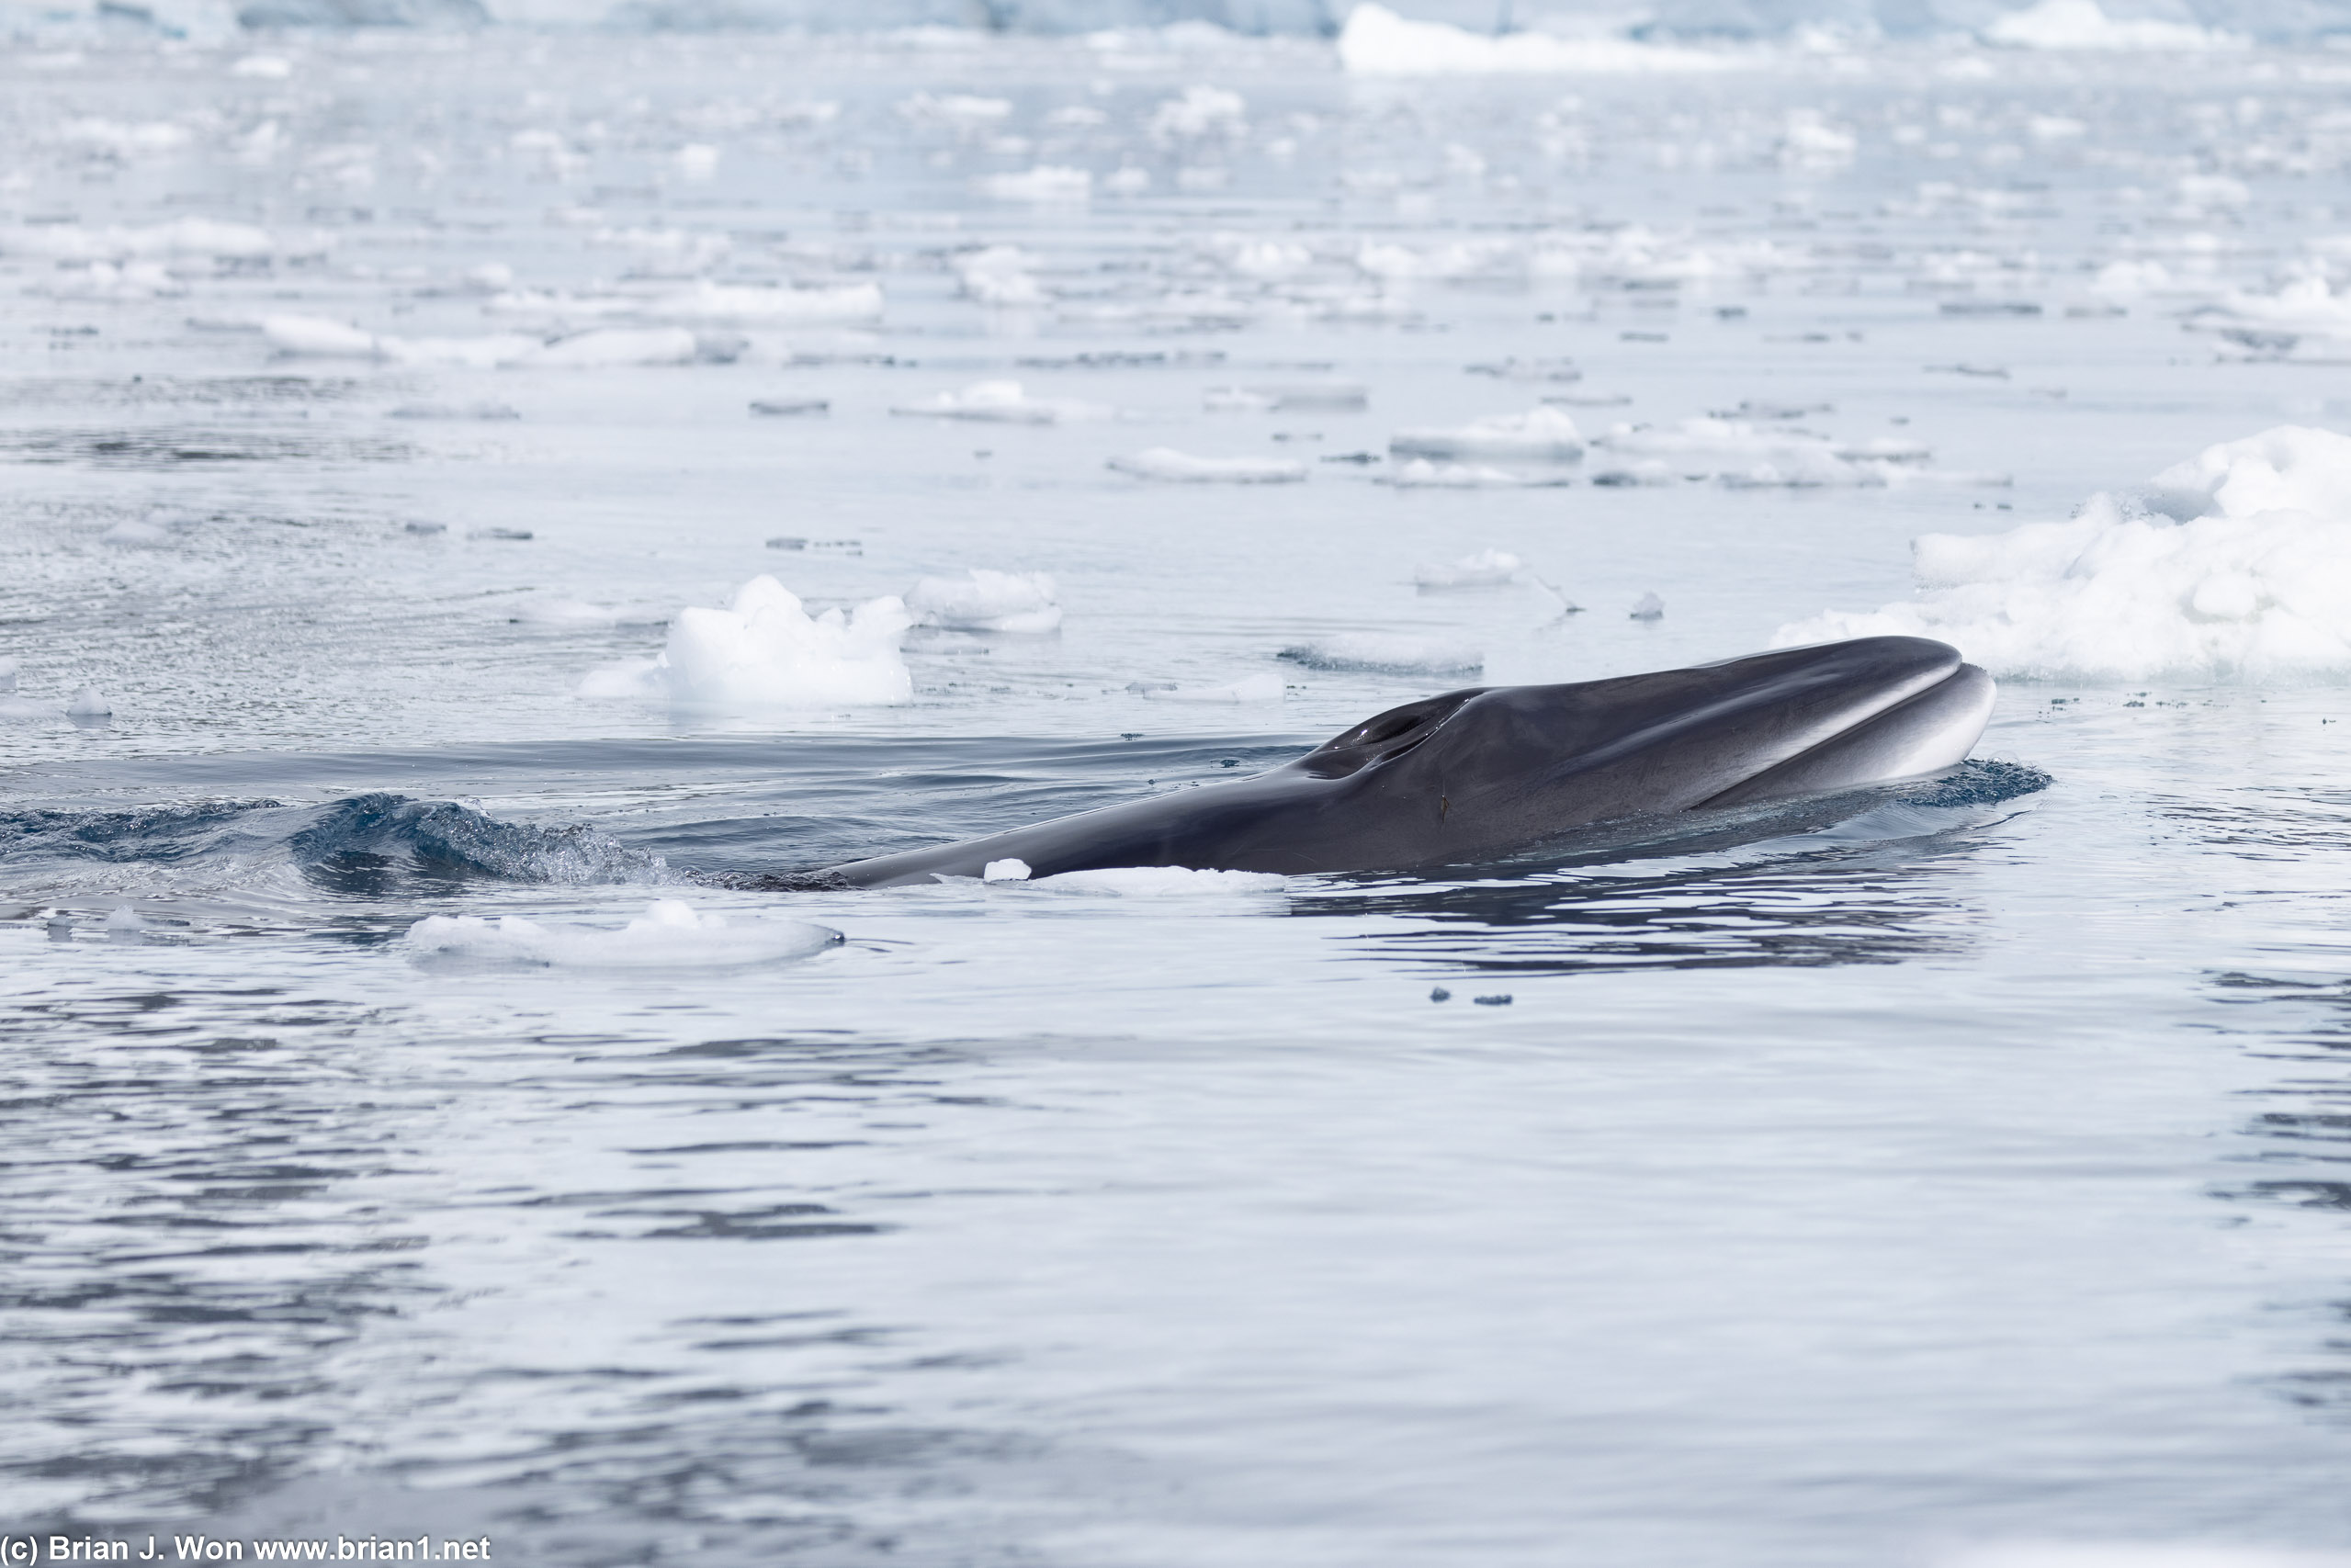 Minke whales didn't want to be left out either.